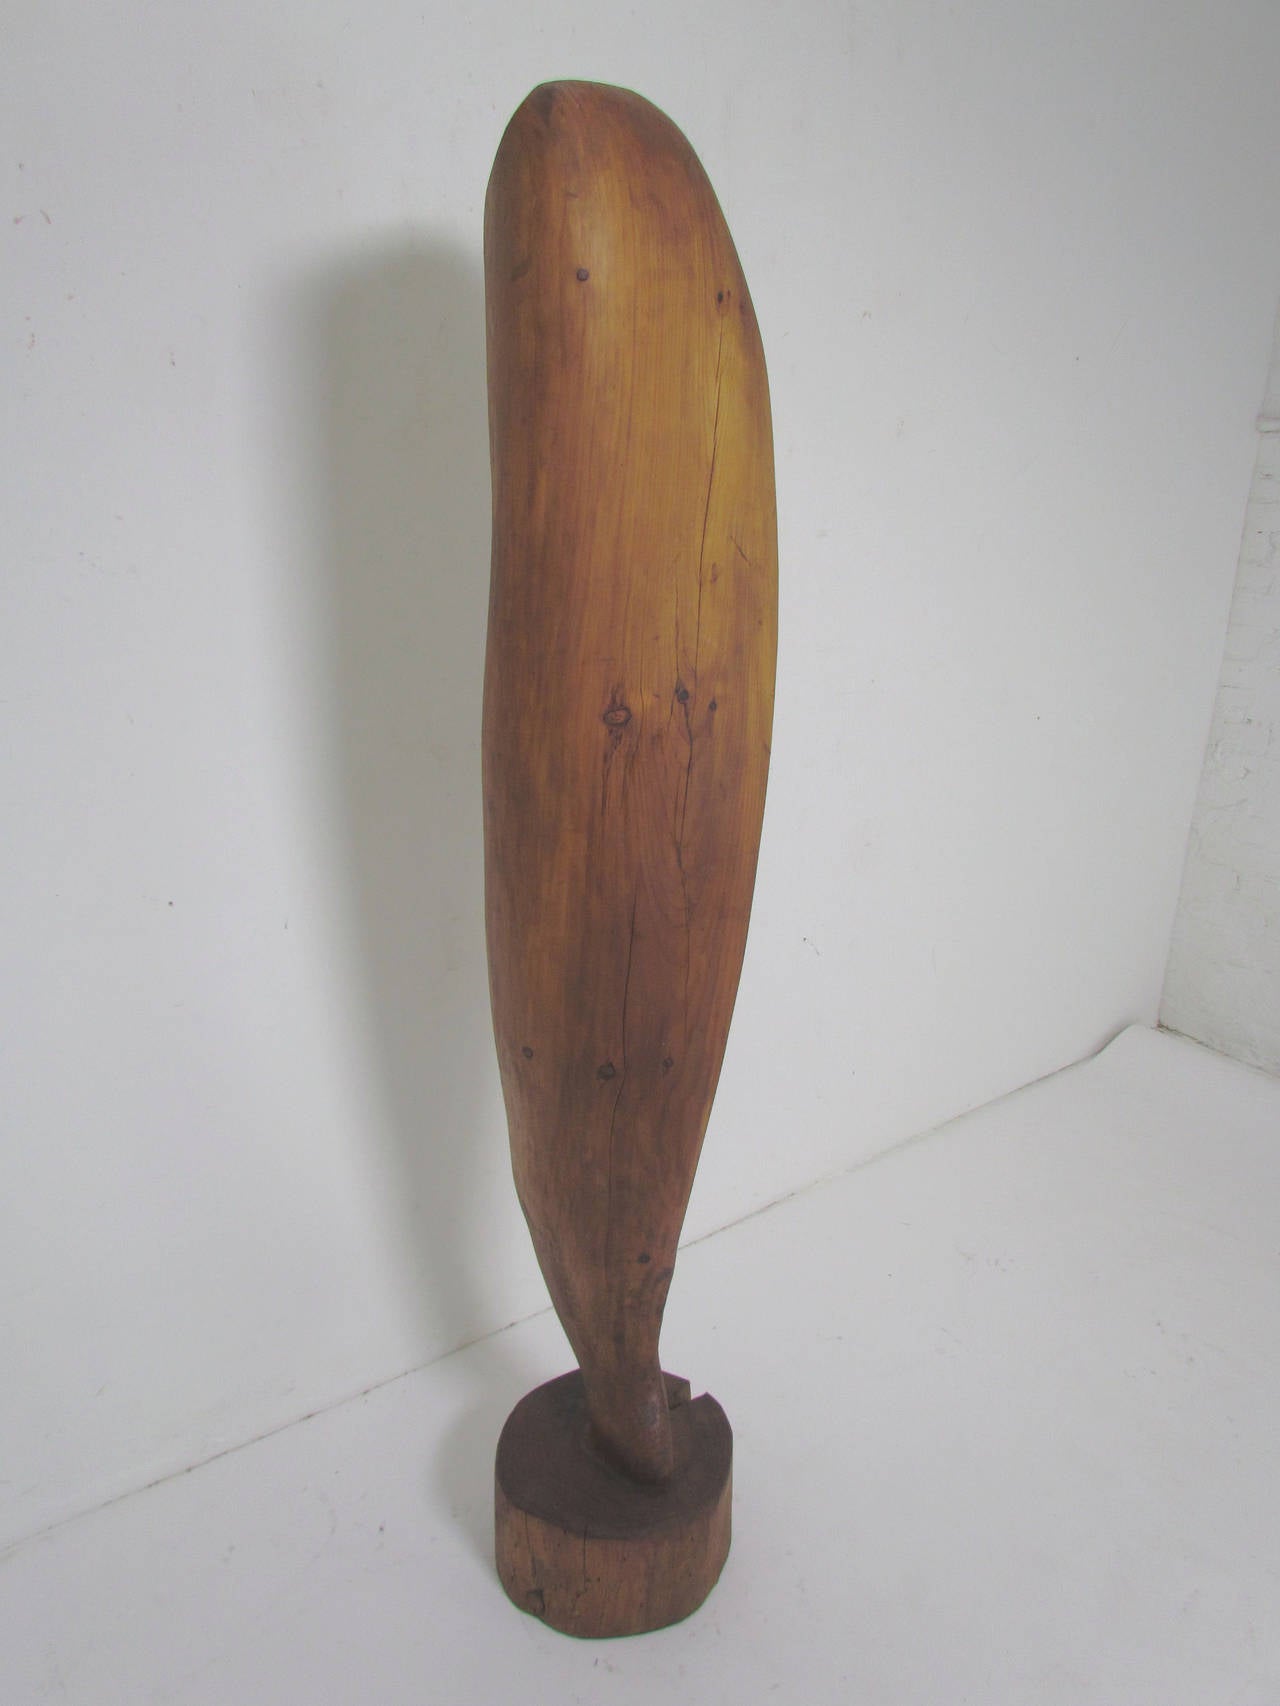 Late 20th Century Abstract Hand-Carved Wood Five Foot Floor Sculpture by F. Neal Eddy, Dated 1979